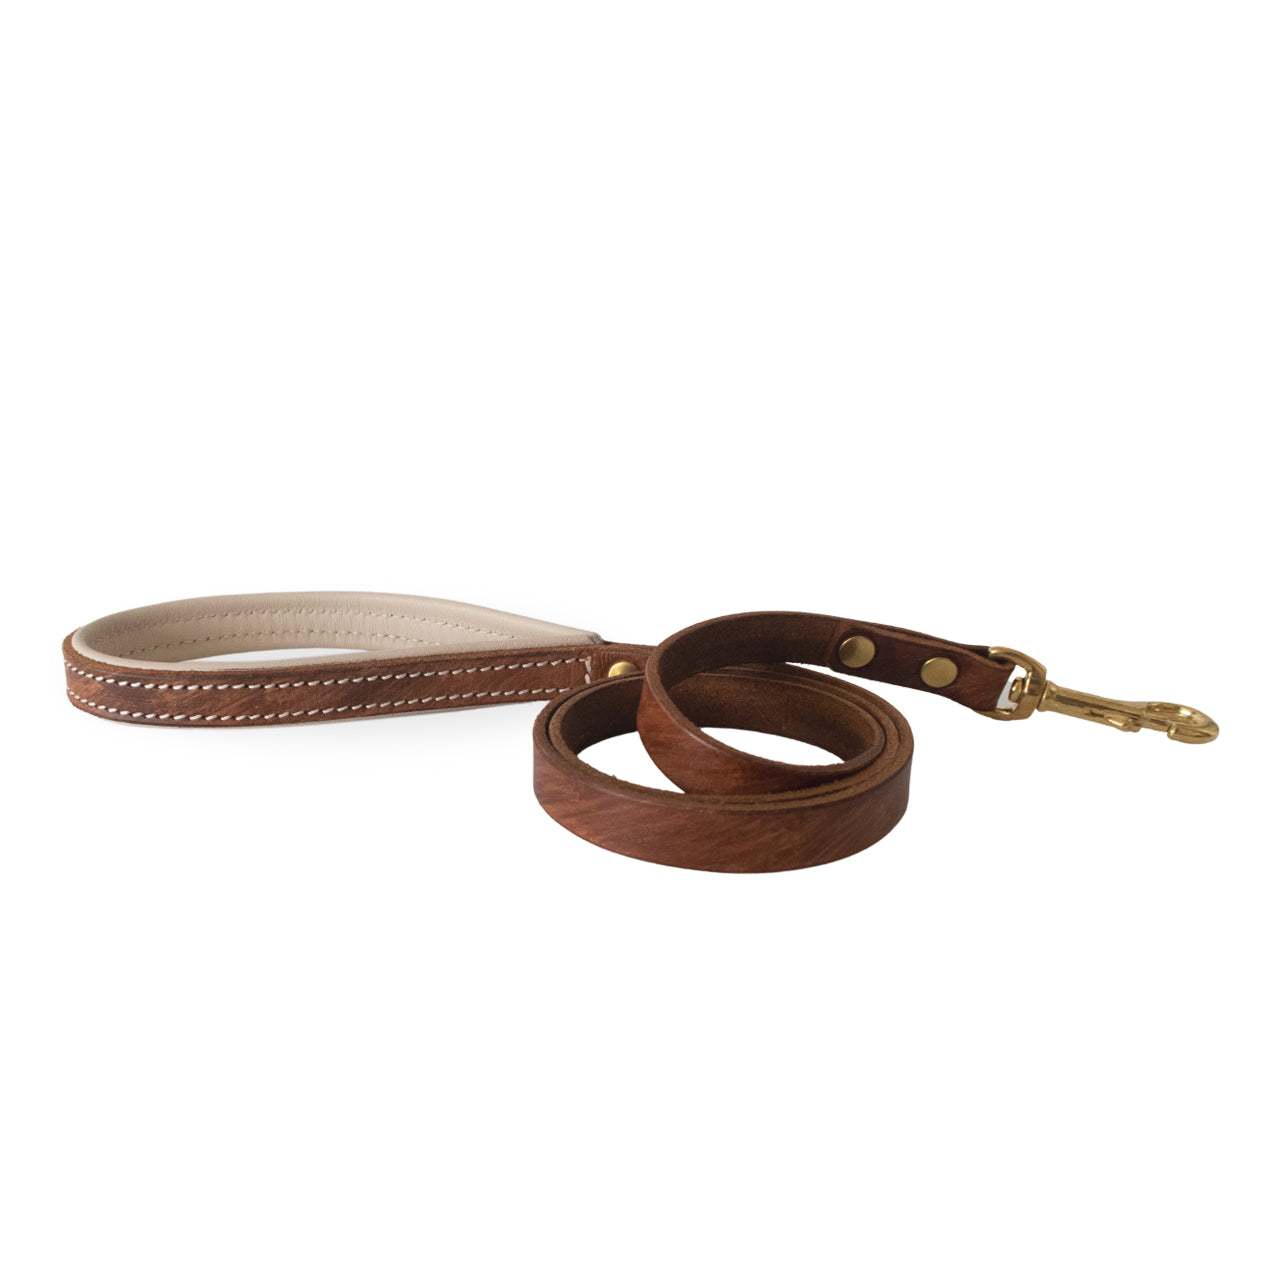 Antique Chic Leather Dog Leash with Padded Handle